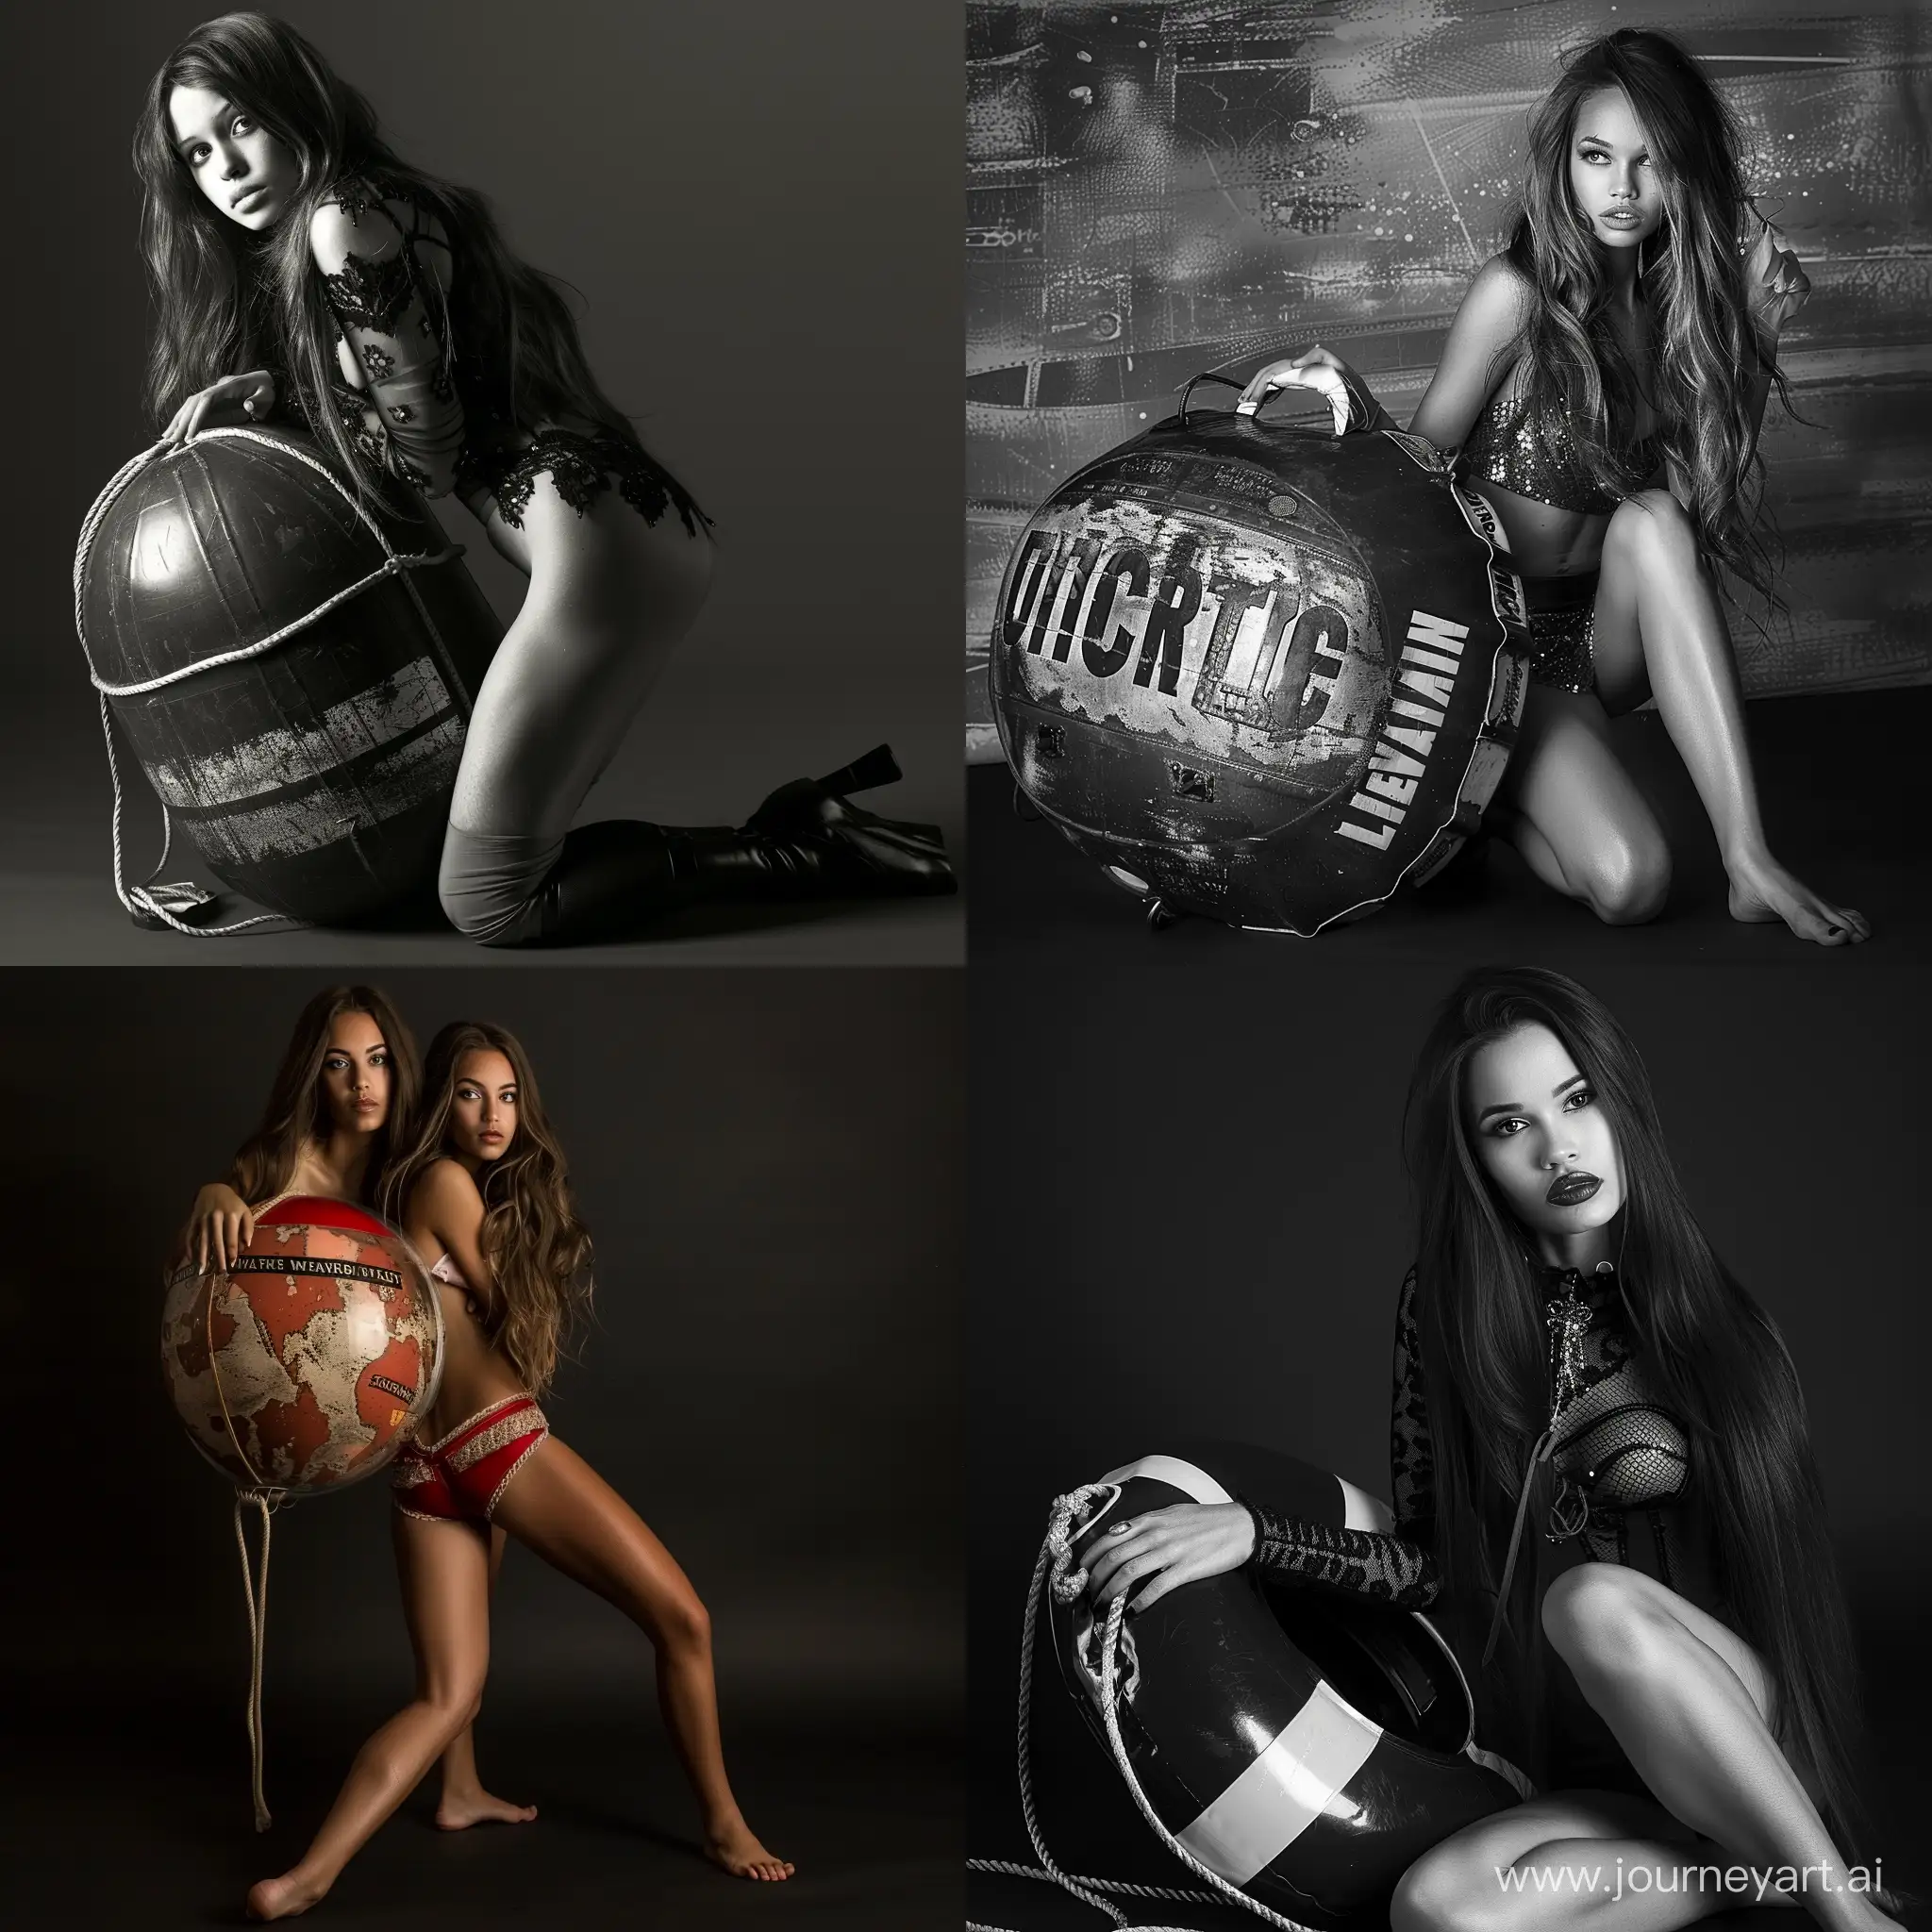 Generate a glamour shot of a girl who is also a top model, featuring her long hair, legs, and whole body. In the image, the girl is elegantly posing with an emergency buoy, exuding beauty and grace.